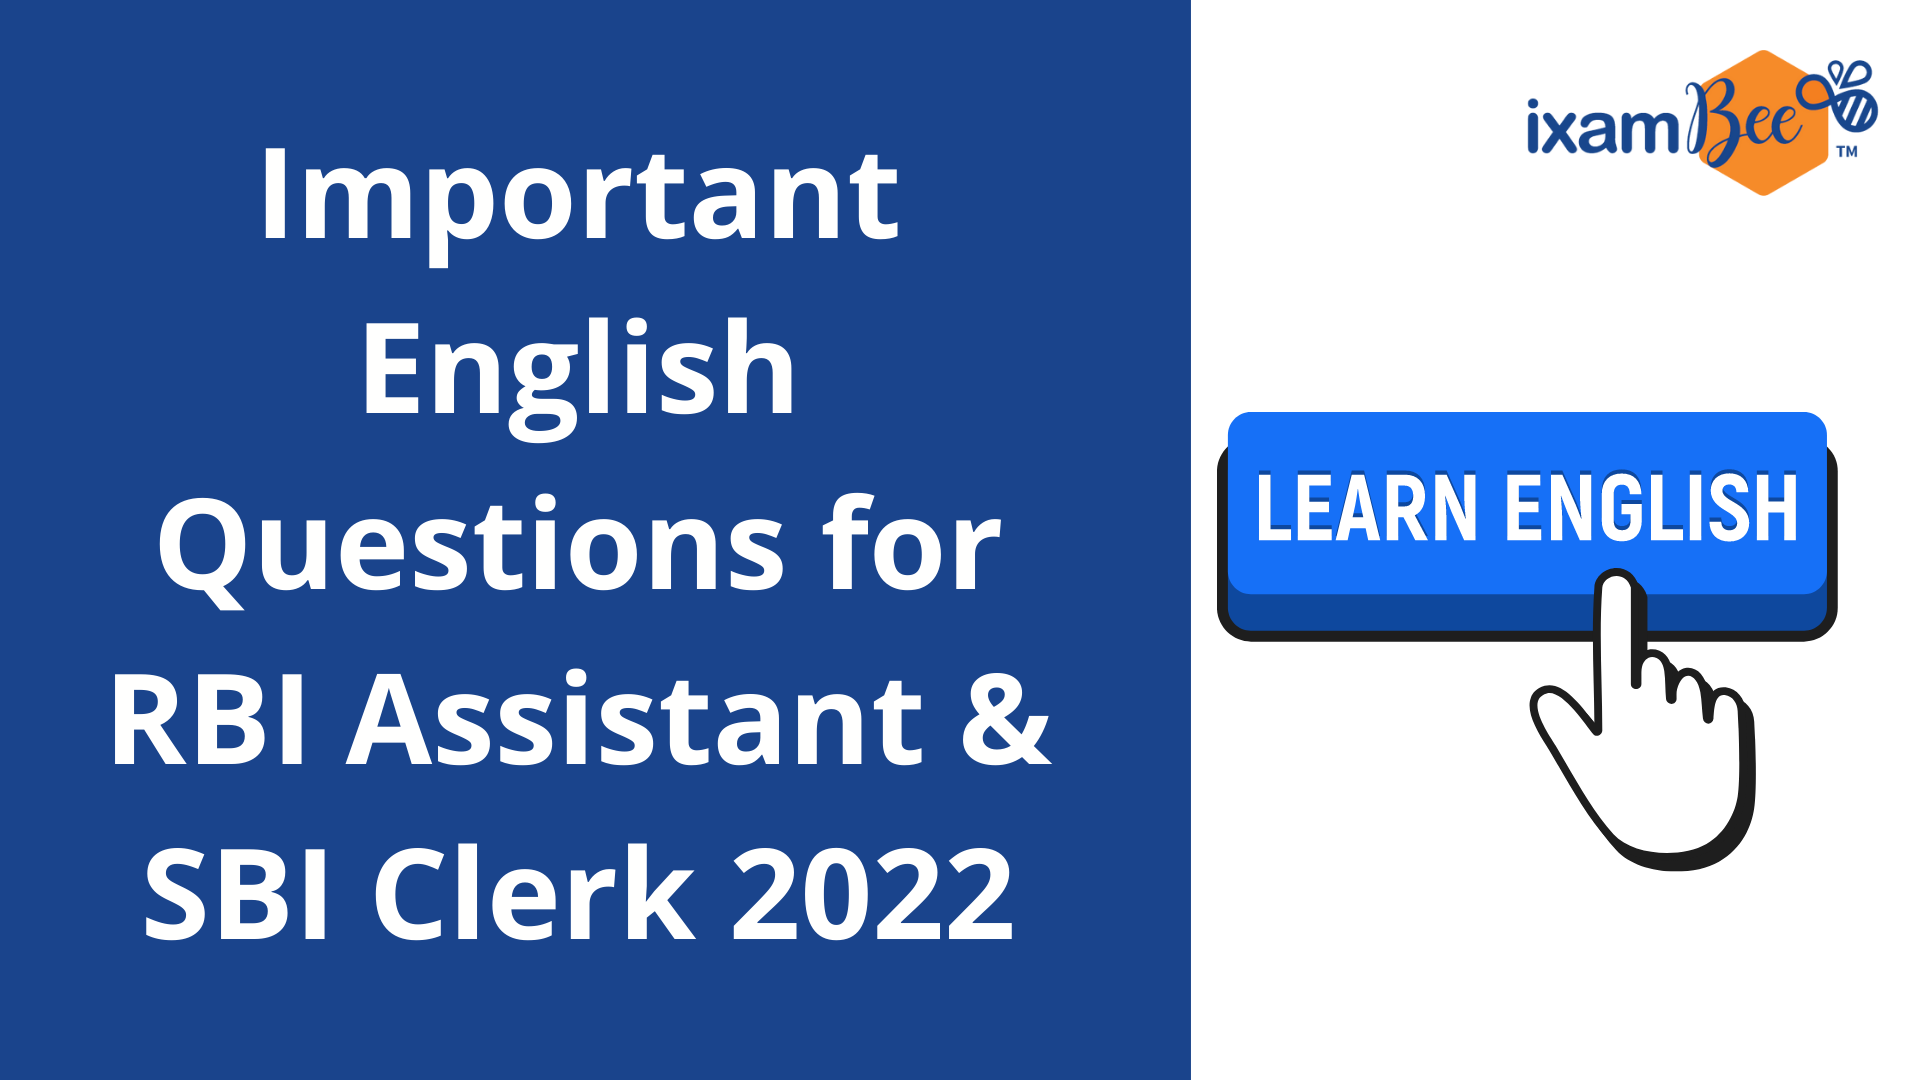 Important English Questions for RBI Assistant & SBI Clerk 2022